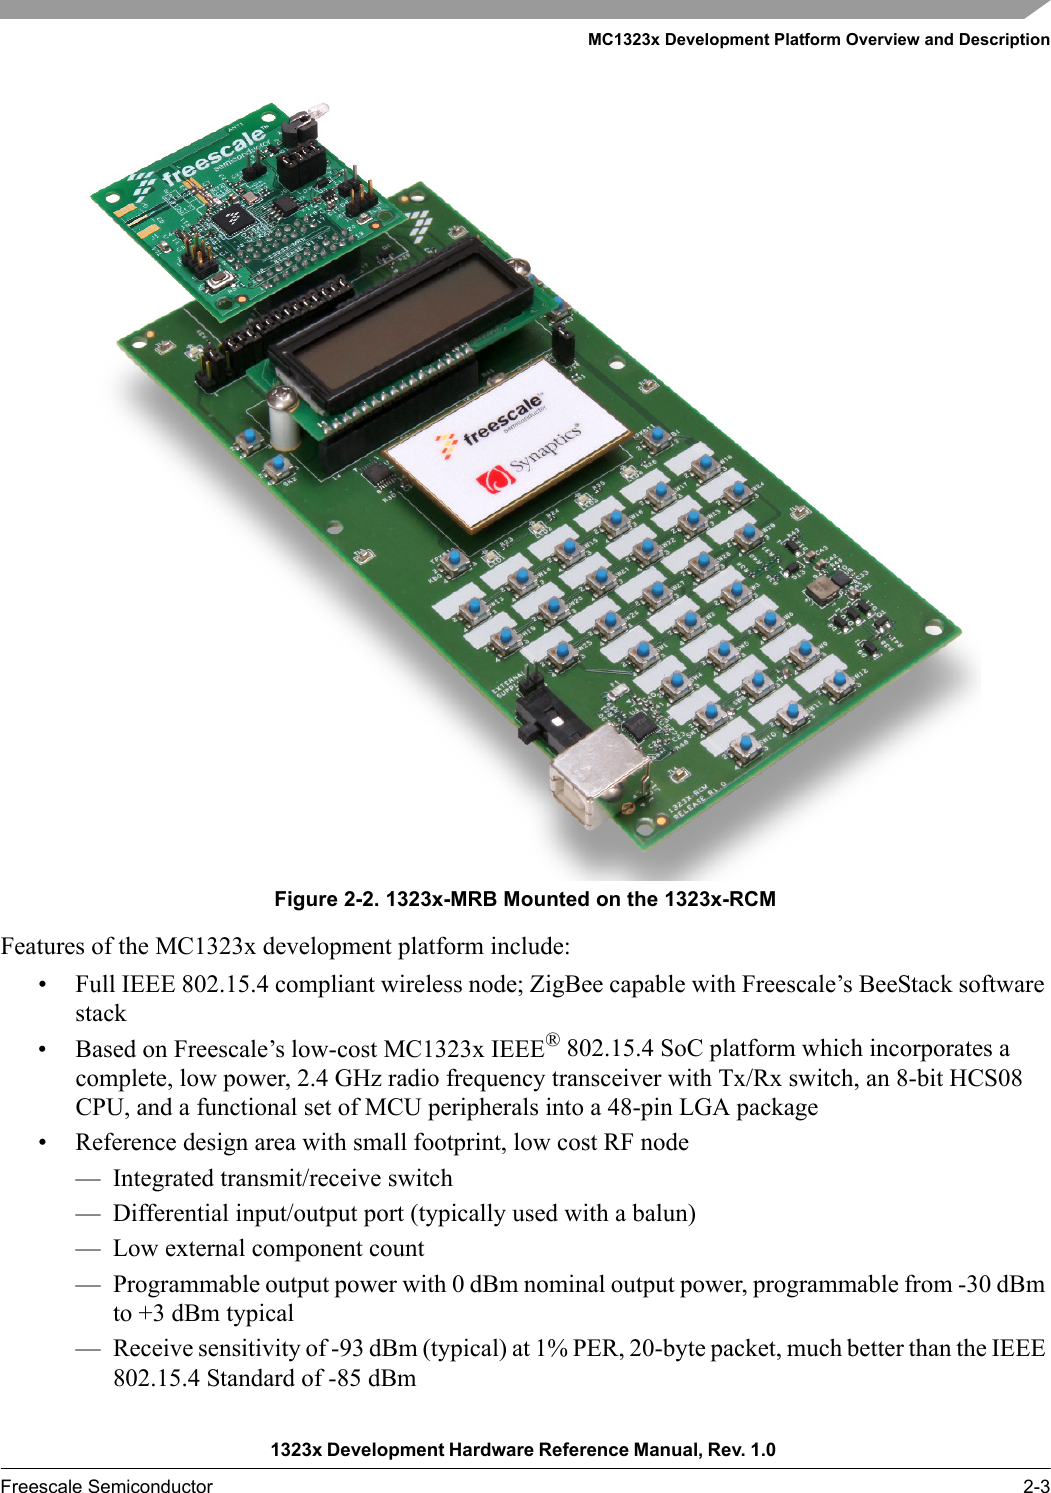 MC1323x Development Platform Overview and Description1323x Development Hardware Reference Manual, Rev. 1.0 Freescale Semiconductor 2-3Figure 2-2. 1323x-MRB Mounted on the 1323x-RCMFeatures of the MC1323x development platform include:• Full IEEE 802.15.4 compliant wireless node; ZigBee capable with Freescale’s BeeStack software stack• Based on Freescale’s low-cost MC1323x IEEE® 802.15.4 SoC platform which incorporates a complete, low power, 2.4 GHz radio frequency transceiver with Tx/Rx switch, an 8-bit HCS08 CPU, and a functional set of MCU peripherals into a 48-pin LGA package• Reference design area with small footprint, low cost RF node— Integrated transmit/receive switch— Differential input/output port (typically used with a balun)— Low external component count— Programmable output power with 0 dBm nominal output power, programmable from -30 dBm to +3 dBm typical— Receive sensitivity of -93 dBm (typical) at 1% PER, 20-byte packet, much better than the IEEE 802.15.4 Standard of -85 dBm